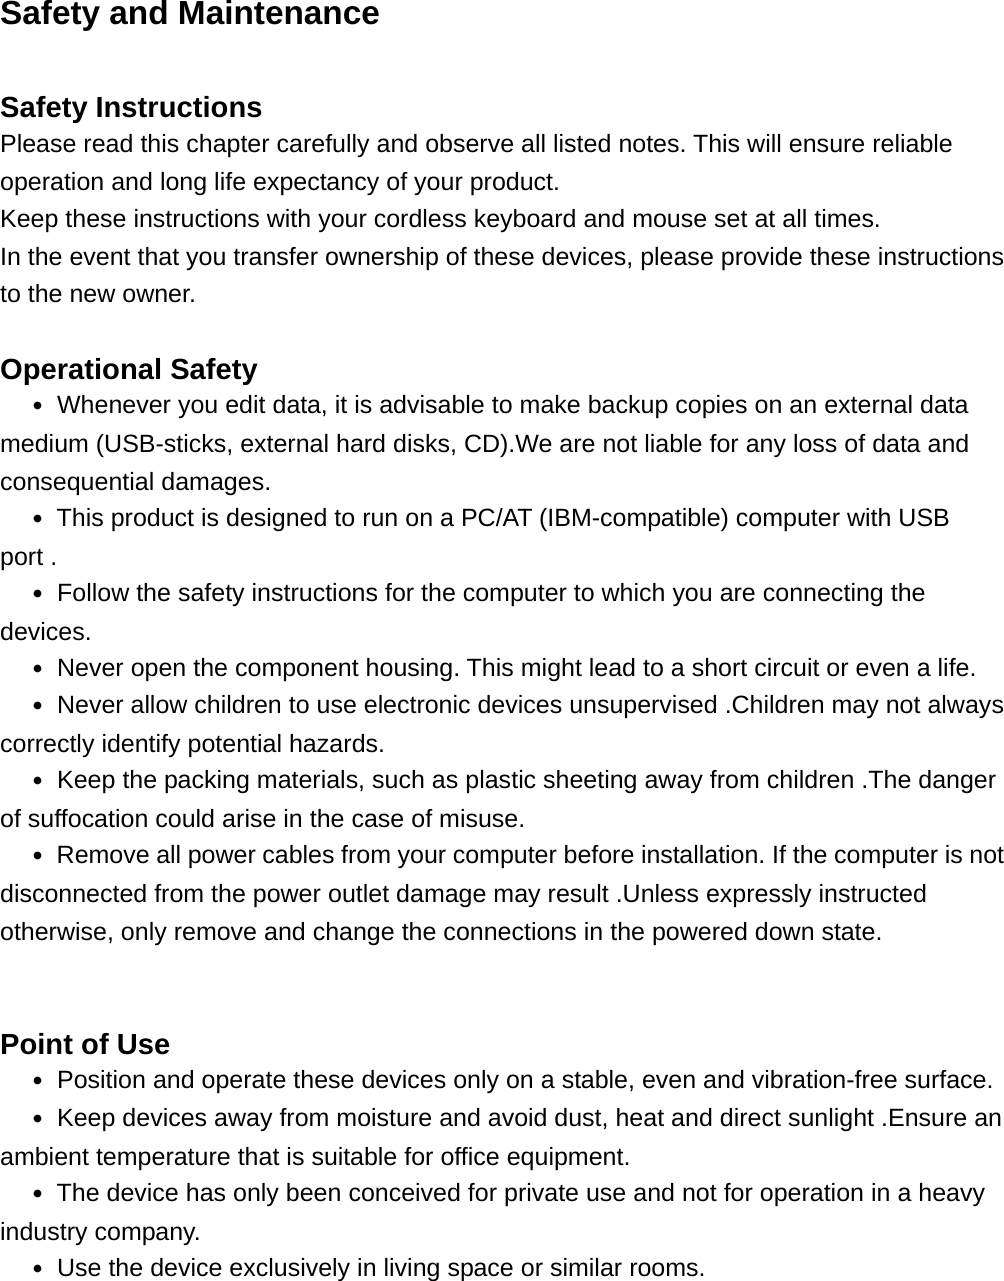 Safety and Maintenance  Safety Instructions Please read this chapter carefully and observe all listed notes. This will ensure reliable operation and long life expectancy of your product. Keep these instructions with your cordless keyboard and mouse set at all times. In the event that you transfer ownership of these devices, please provide these instructions to the new owner.  Operational Safety   ․ Whenever you edit data, it is advisable to make backup copies on an external data medium (USB-sticks, external hard disks, CD).We are not liable for any loss of data and consequential damages.   ․ This product is designed to run on a PC/AT (IBM-compatible) computer with USB port .   ․ Follow the safety instructions for the computer to which you are connecting the devices.   ․ Never open the component housing. This might lead to a short circuit or even a life. ․ Never allow children to use electronic devices unsupervised .Children may not always correctly identify potential hazards. ․ Keep the packing materials, such as plastic sheeting away from children .The danger of suffocation could arise in the case of misuse. ․ Remove all power cables from your computer before installation. If the computer is not disconnected from the power outlet damage may result .Unless expressly instructed otherwise, only remove and change the connections in the powered down state.   Point of Use   ․ Position and operate these devices only on a stable, even and vibration-free surface.   ․ Keep devices away from moisture and avoid dust, heat and direct sunlight .Ensure an ambient temperature that is suitable for office equipment.   ․ The device has only been conceived for private use and not for operation in a heavy industry company.   ․ Use the device exclusively in living space or similar rooms.    